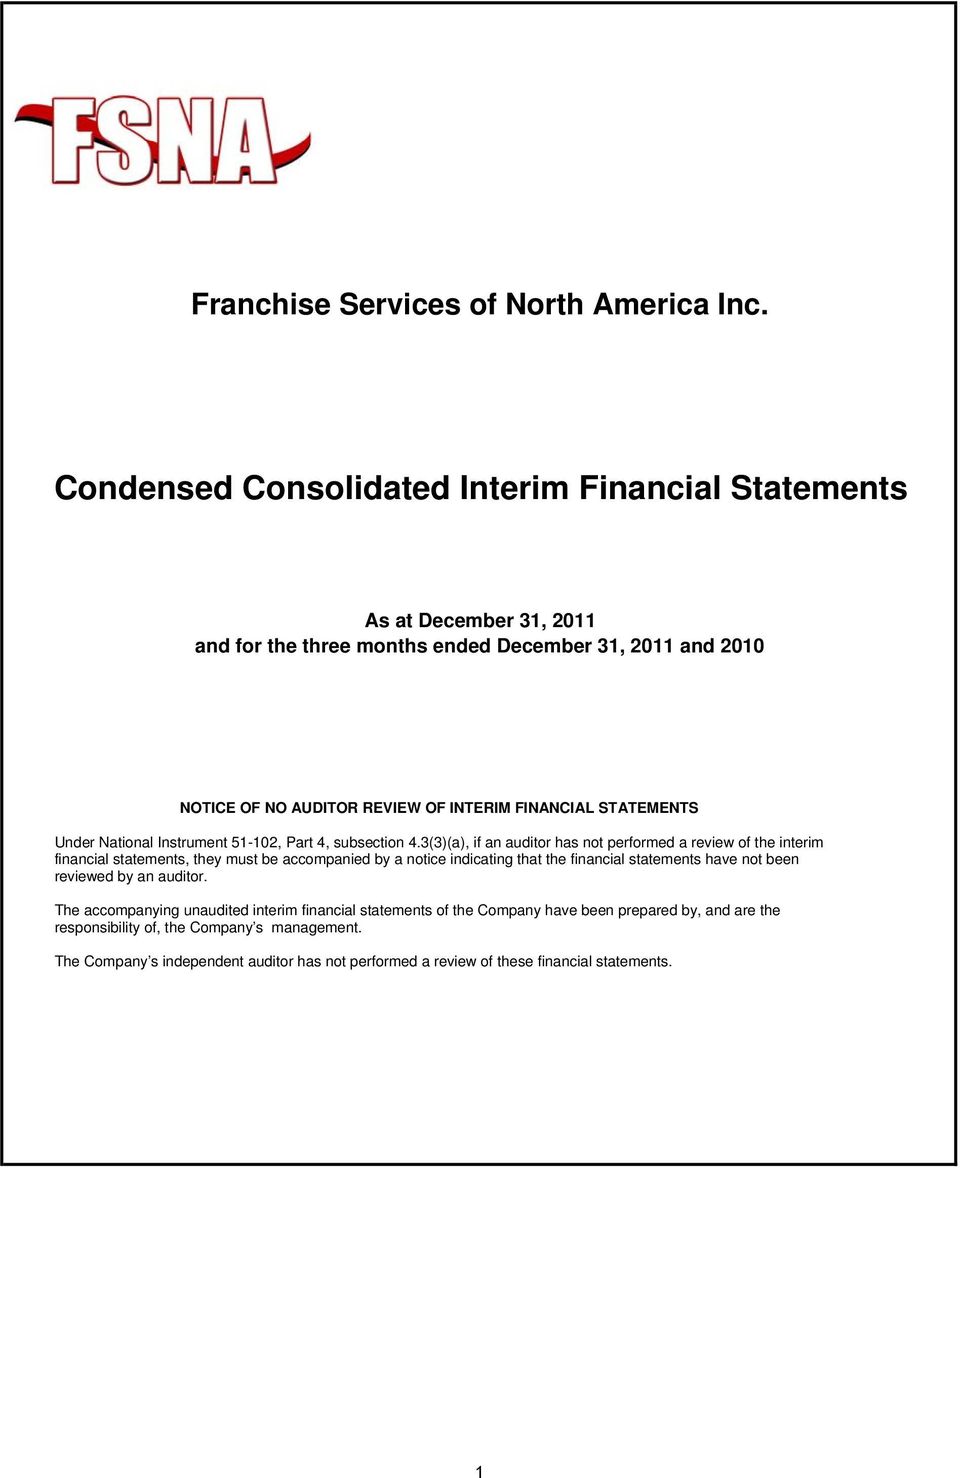 3(3)(a), if an auditor has not performed a review of the interim financial statements, they must be accompanied by a notice indicating that the financial statements have not